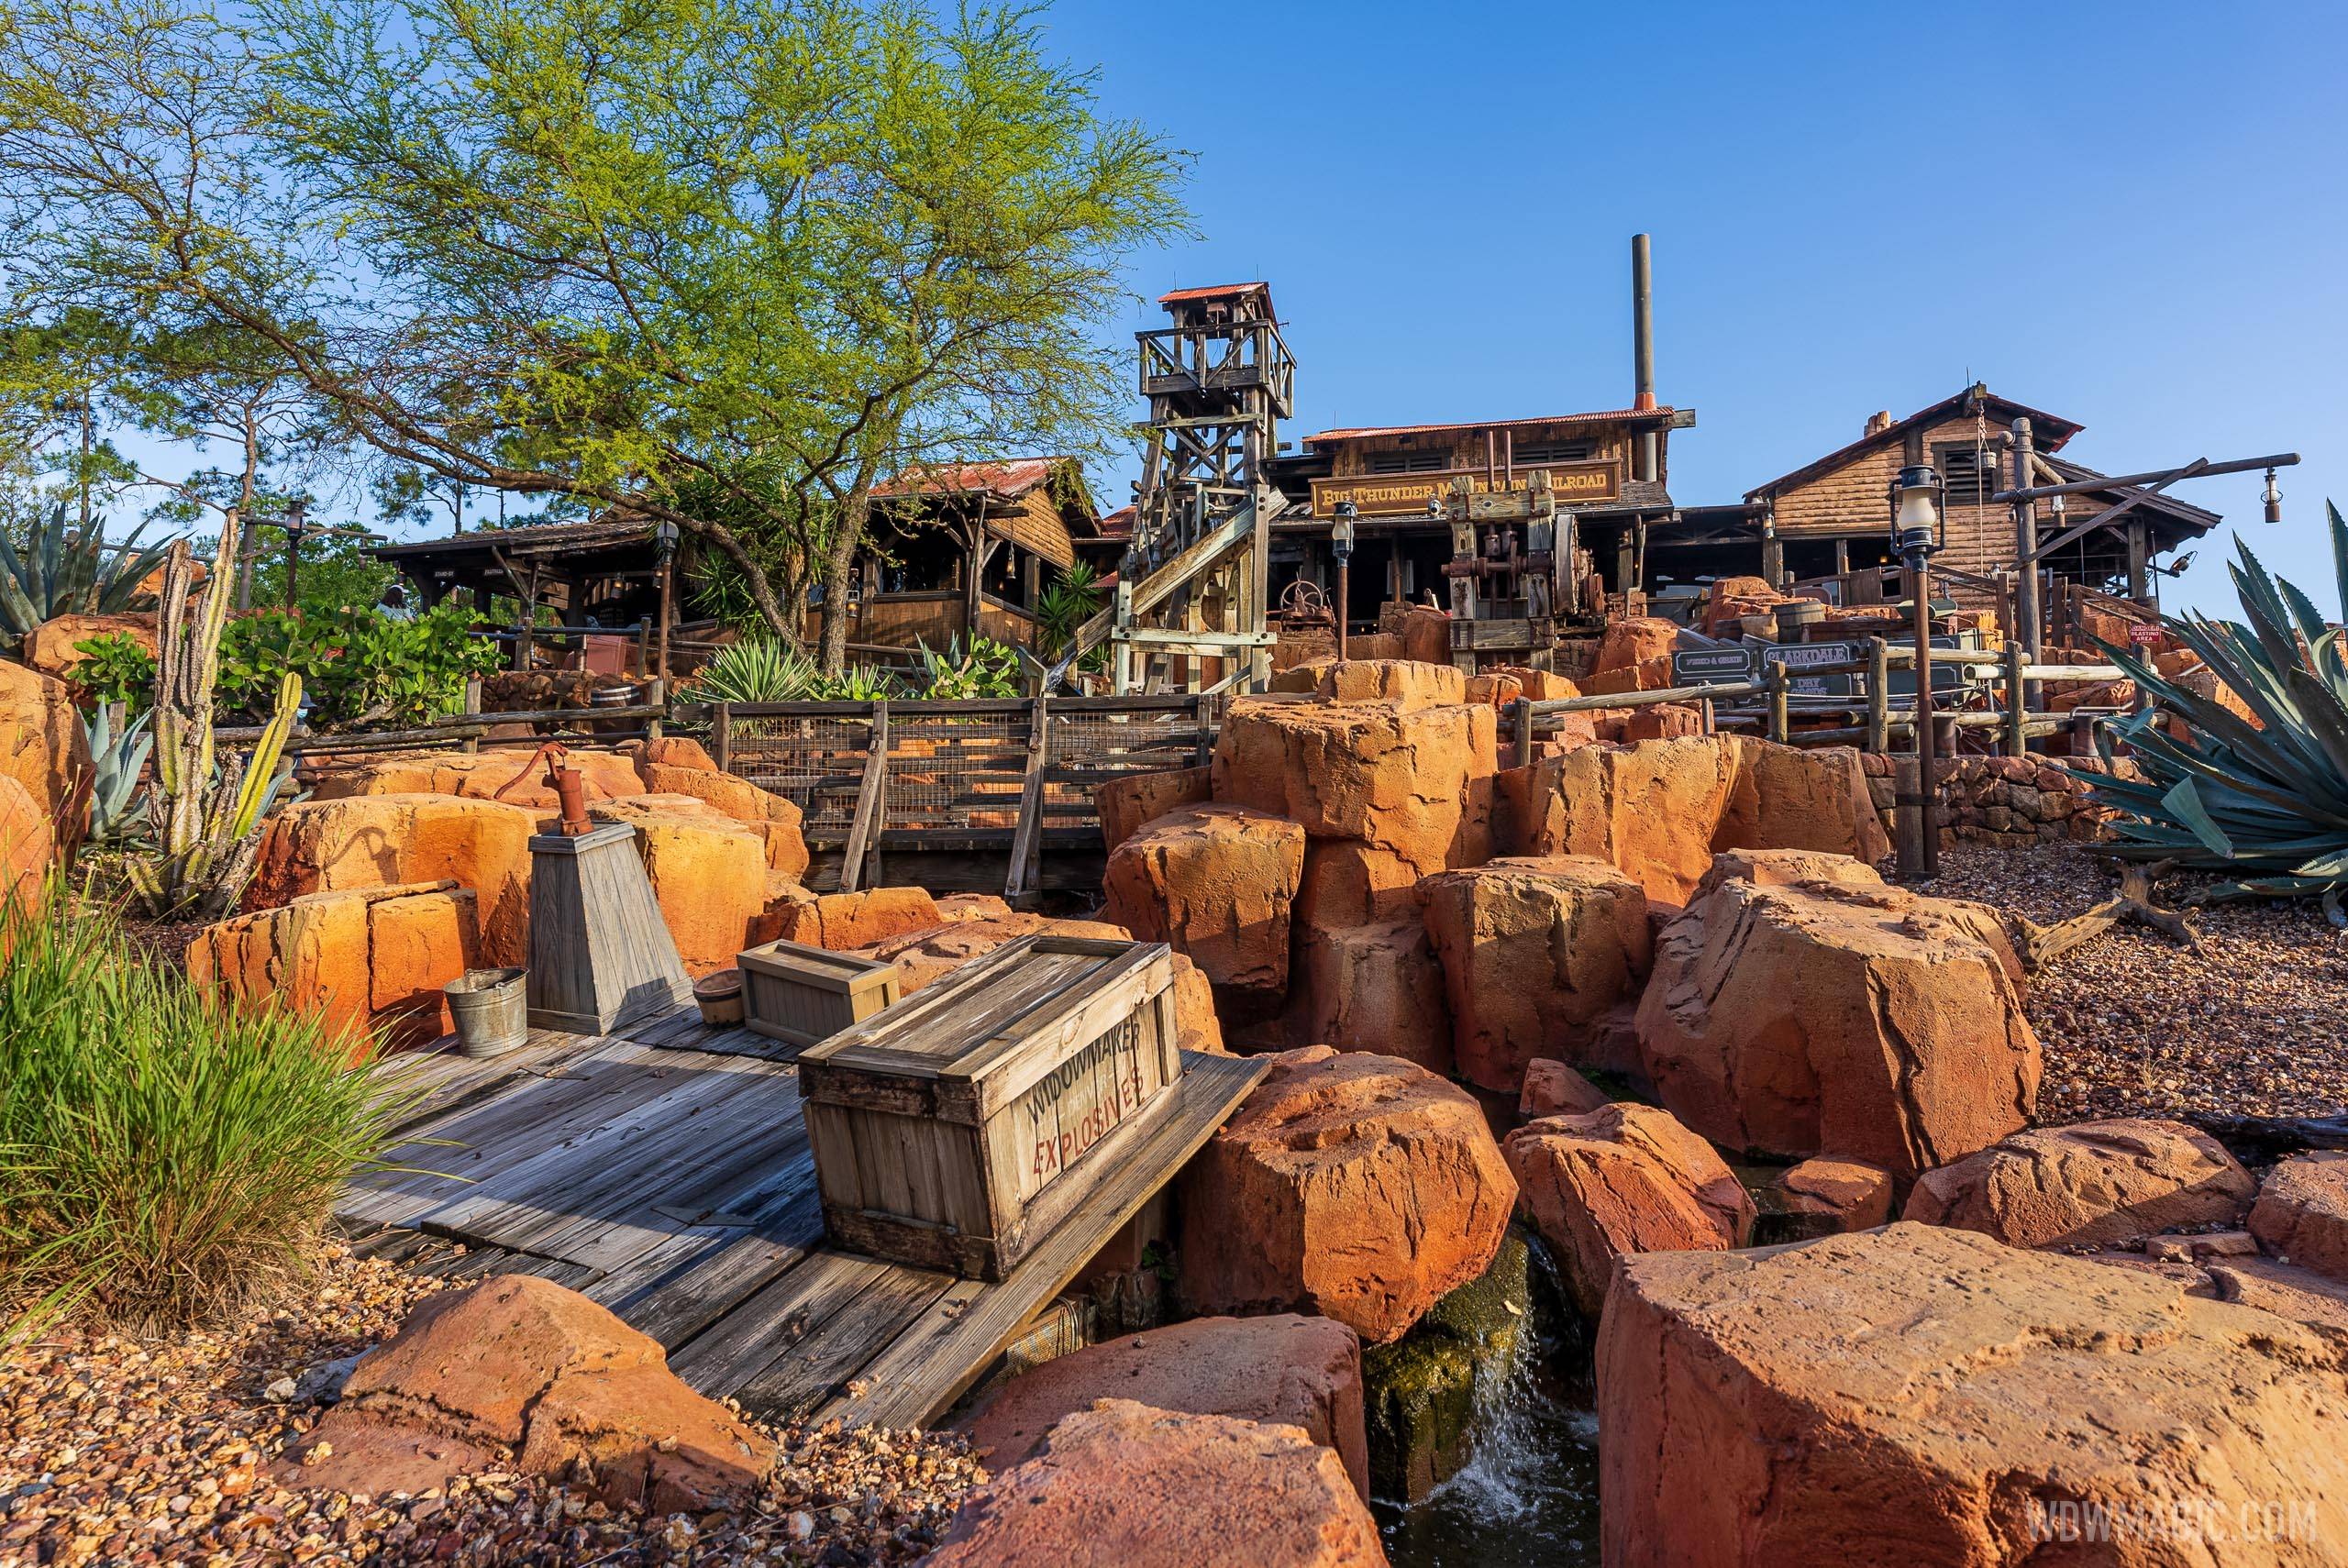 Most rides are closed on the western side of the park, including Big Thunder Mountain.